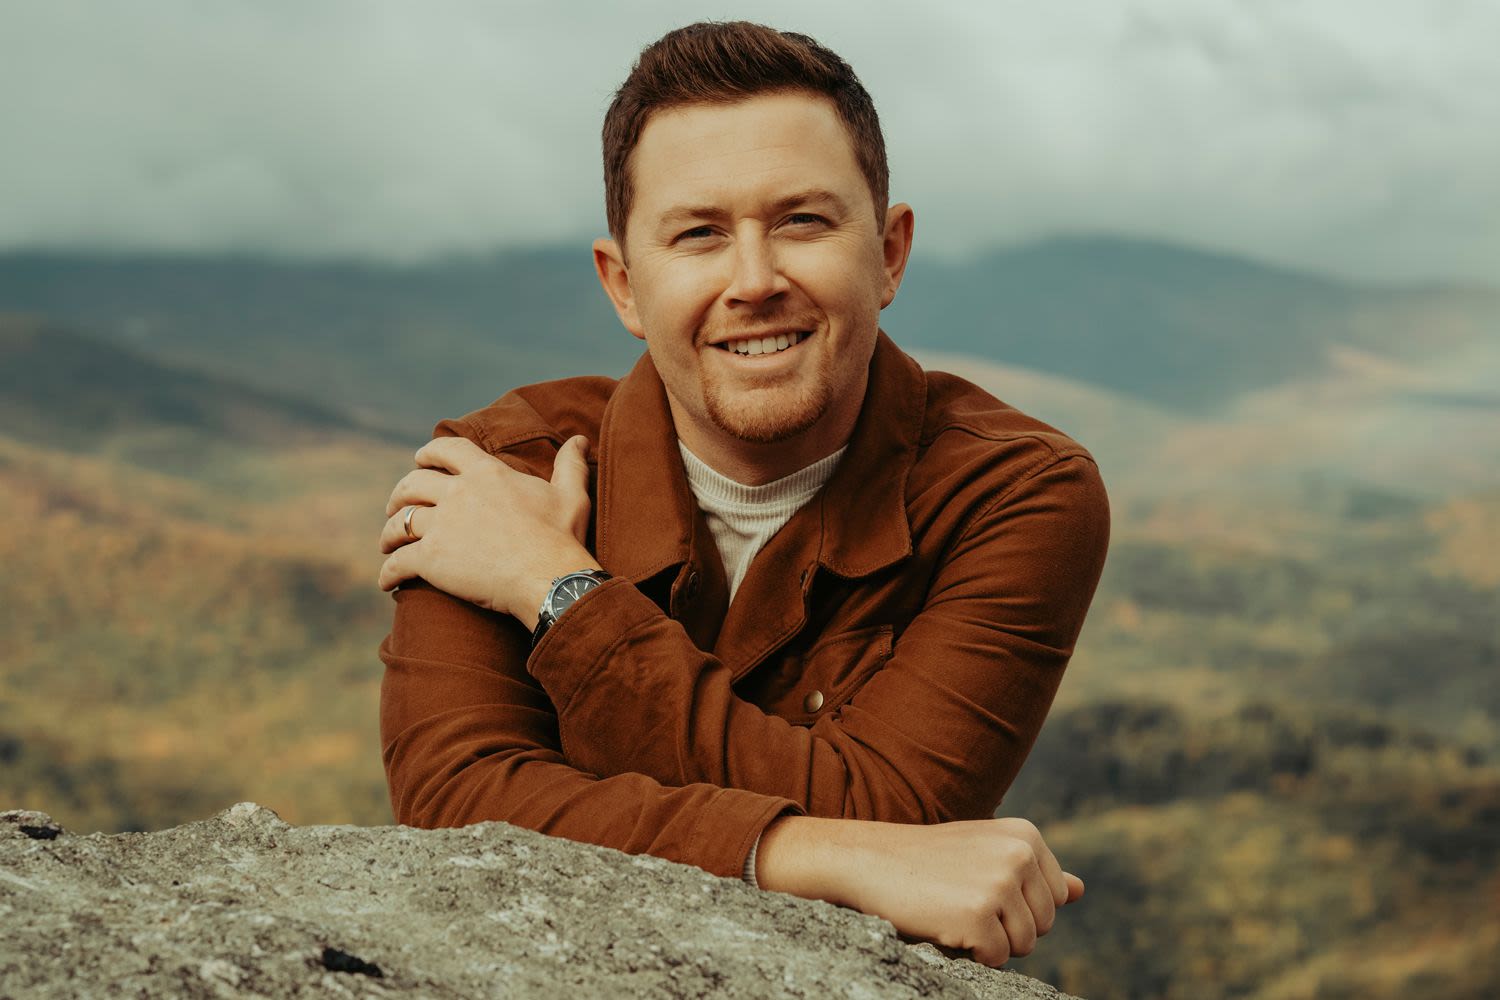 Scotty McCreery Brings the Joy to New Album, Writing and Singing 'What Feels Good' (Exclusive)